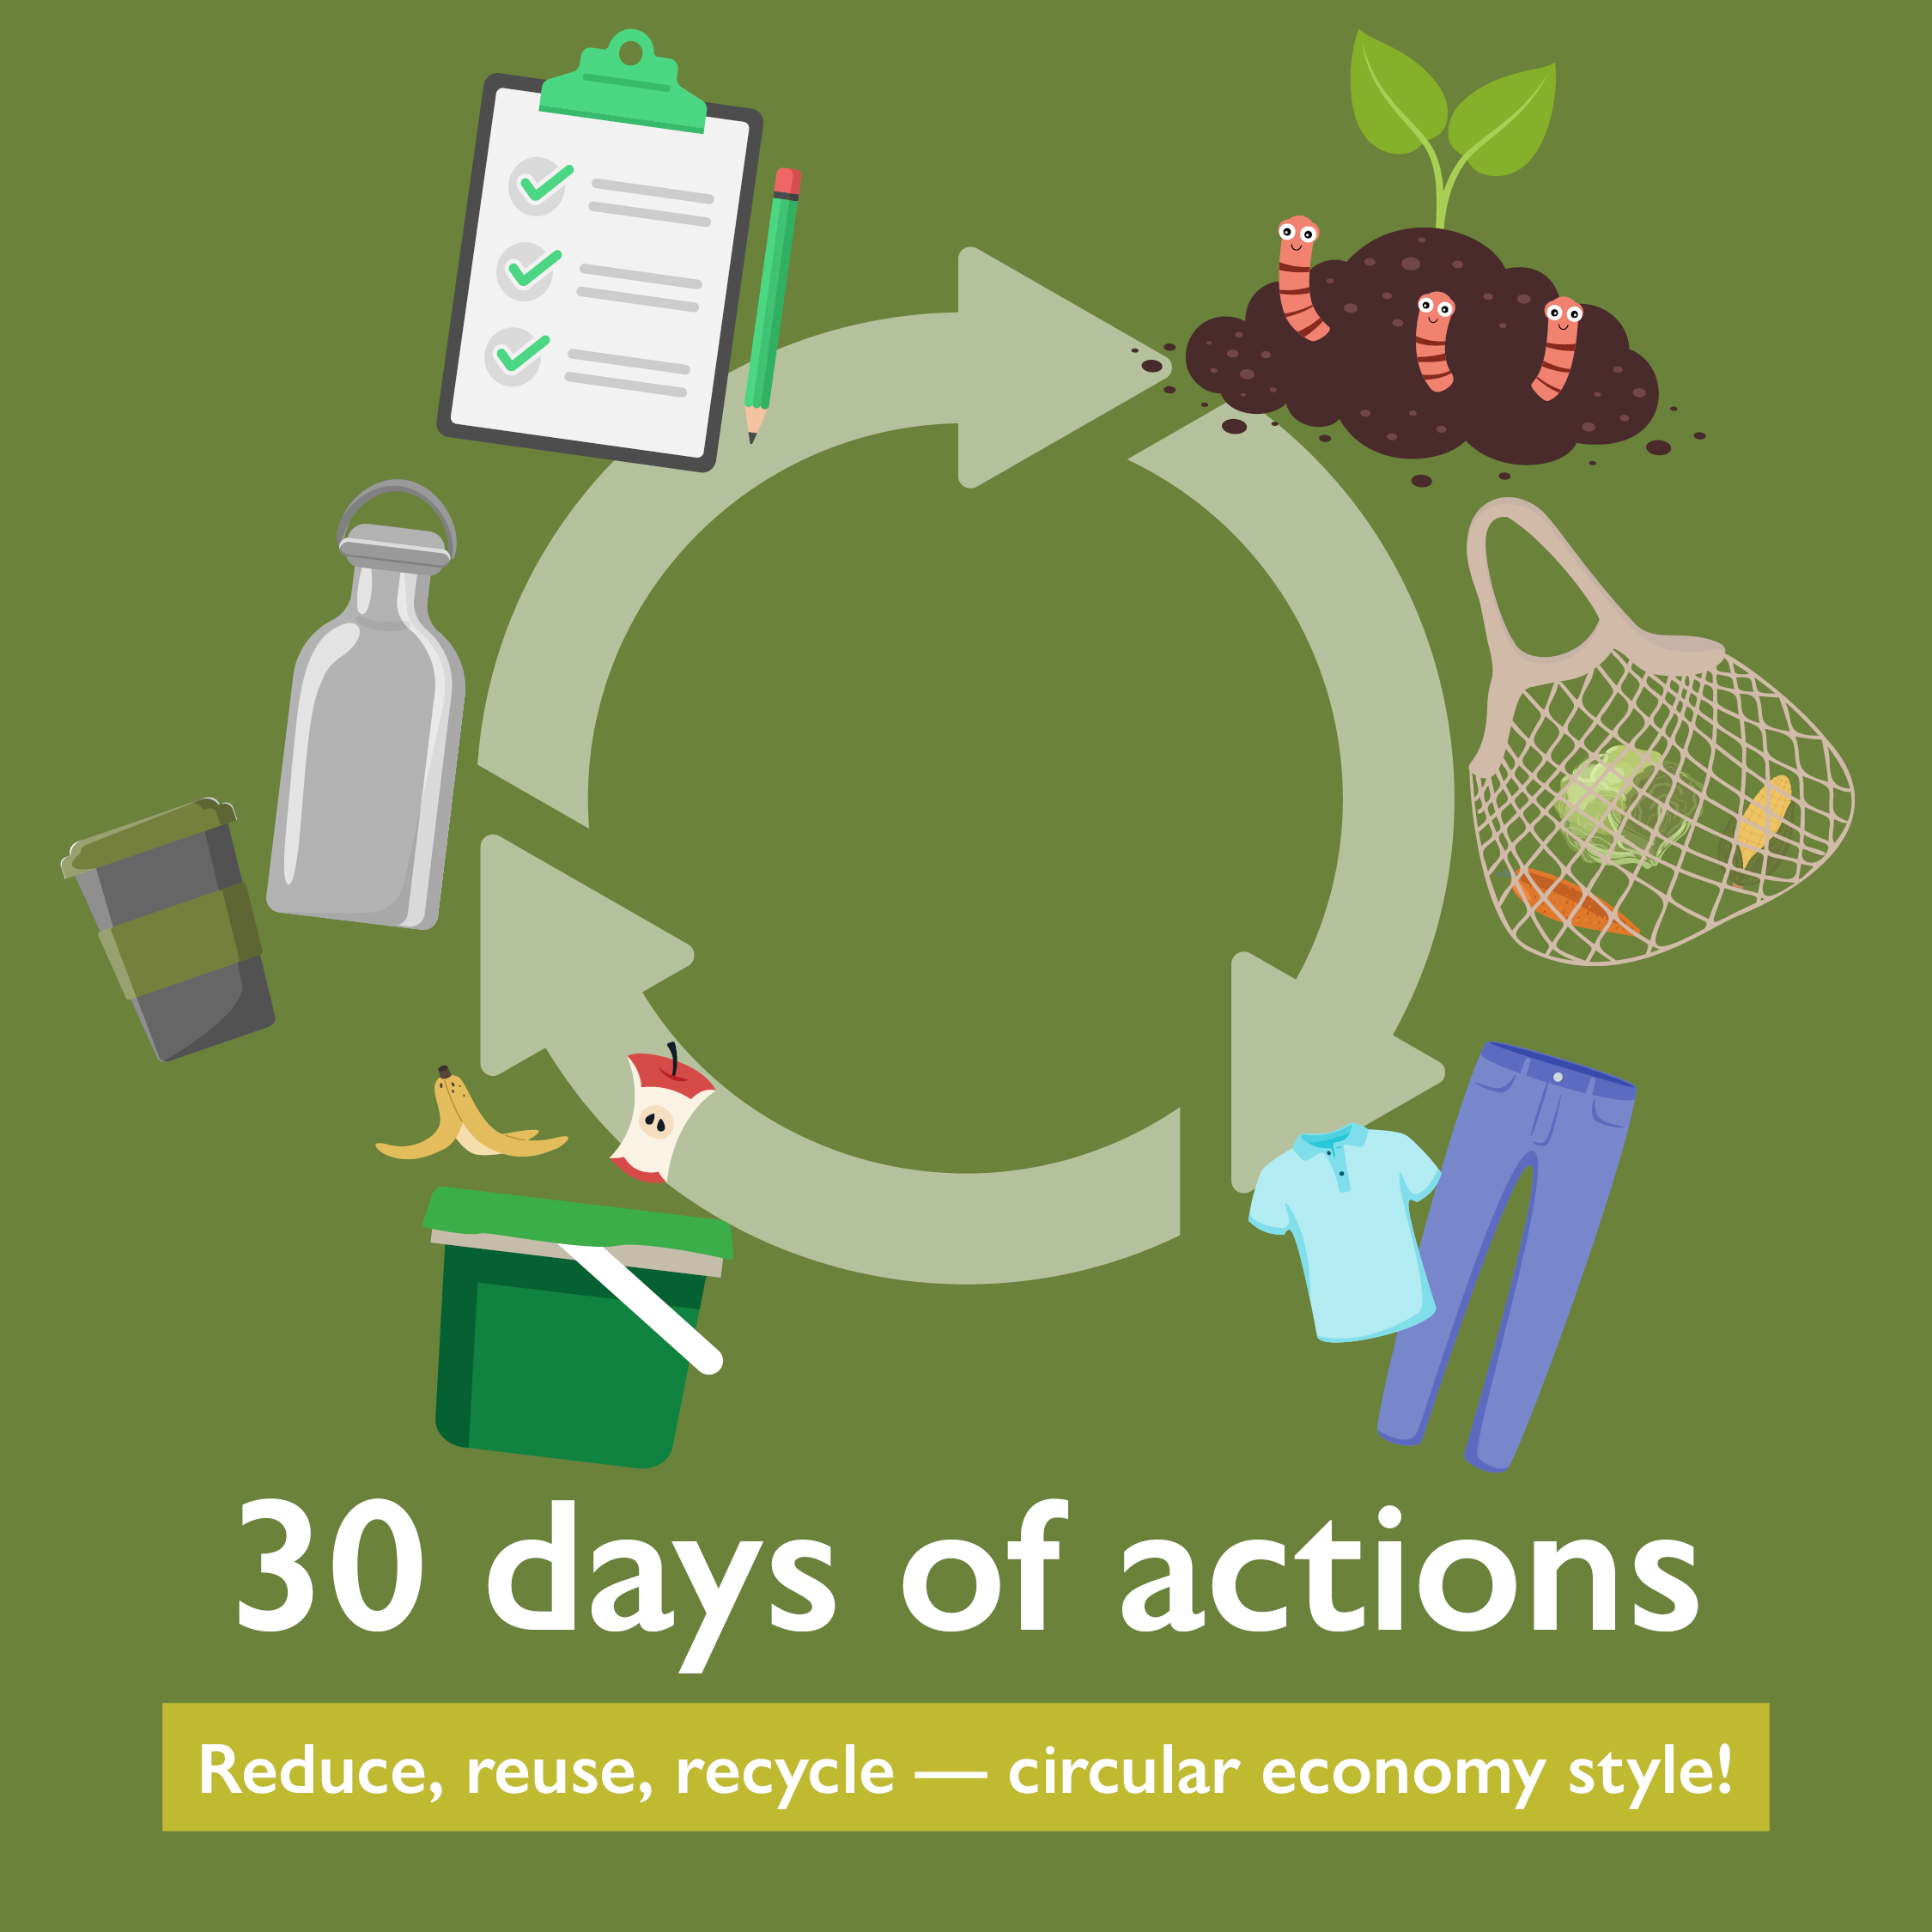 Recycling image with checklist, worm farm, shopping bags, clothes, drink bottles and food waste. 30 days of actions Reduce, reuse, recycle – circular economy style!